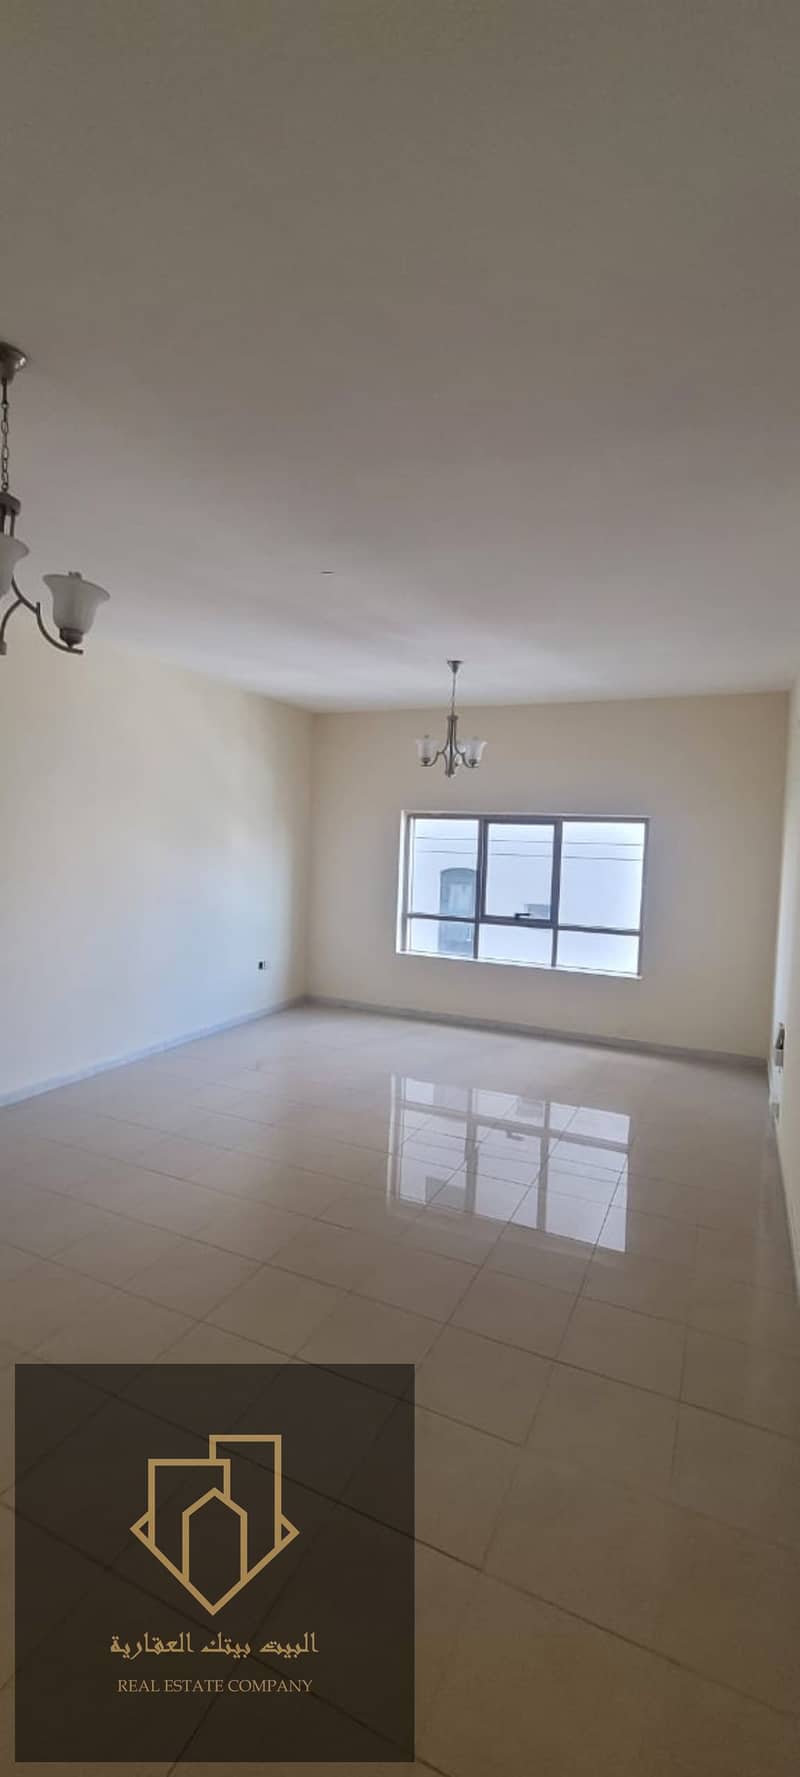 Enjoy staying in a luxurious apartment in the Corniche area, consisting of two rooms and a living room, with a spacious area that provides comfort and relaxation. The apartment is characterized by an excellent location close to all services and a lively l